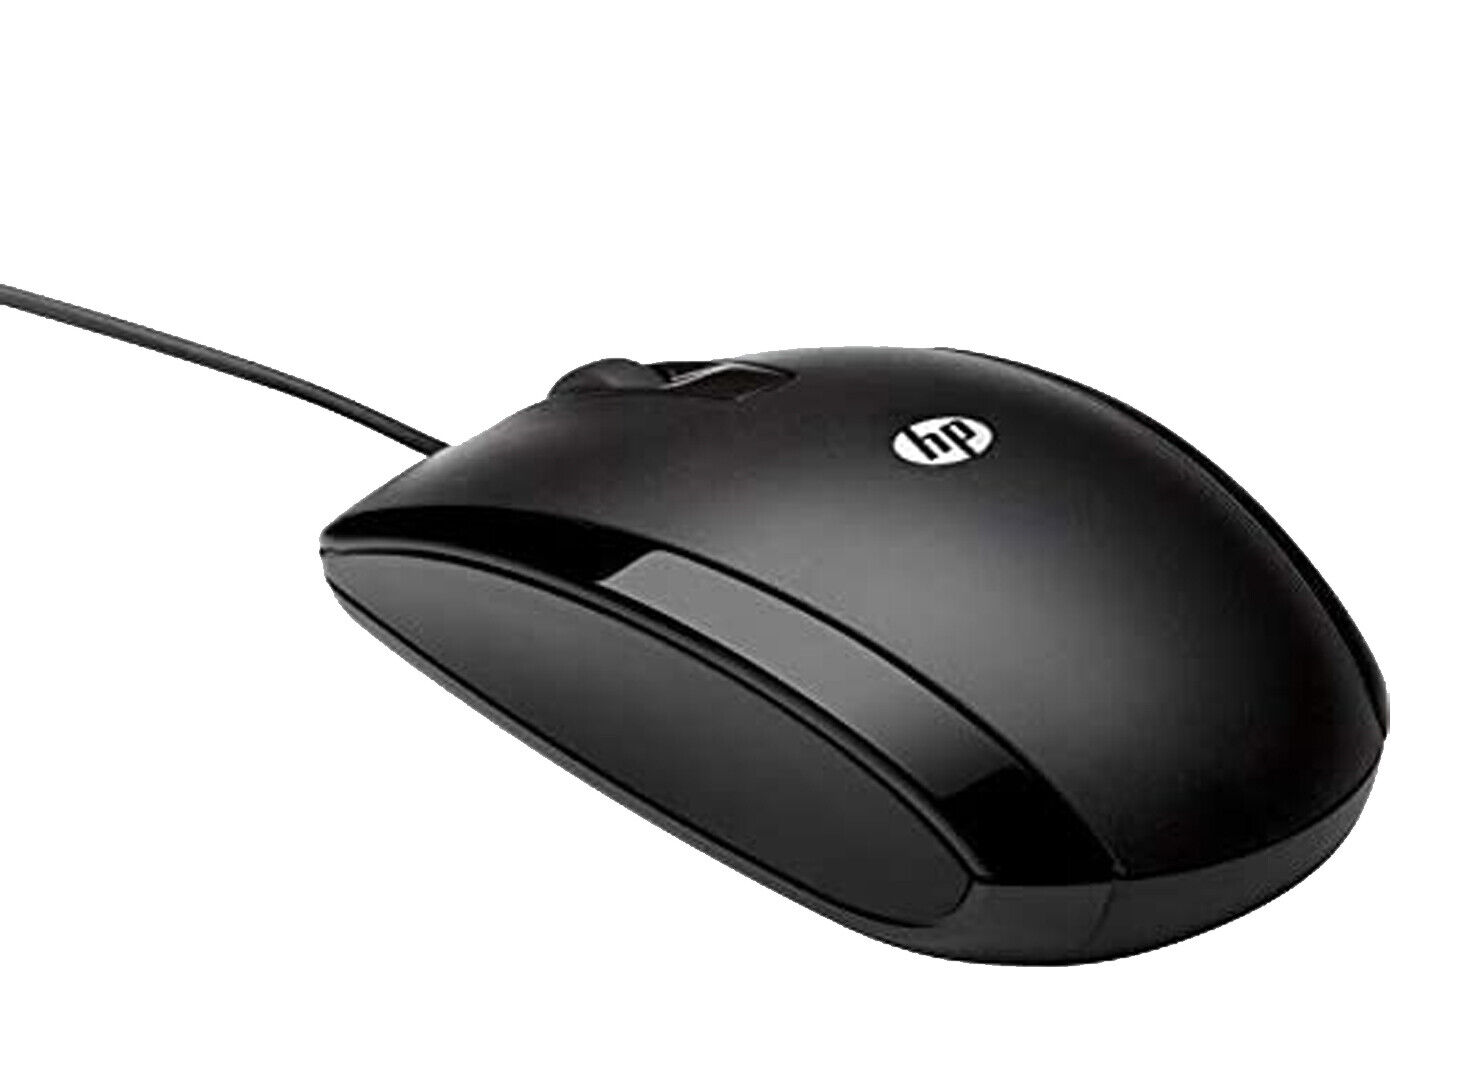 HP Black USB Comfortable Corded Optical Wired Mouse for Notebook Laptop Desktop